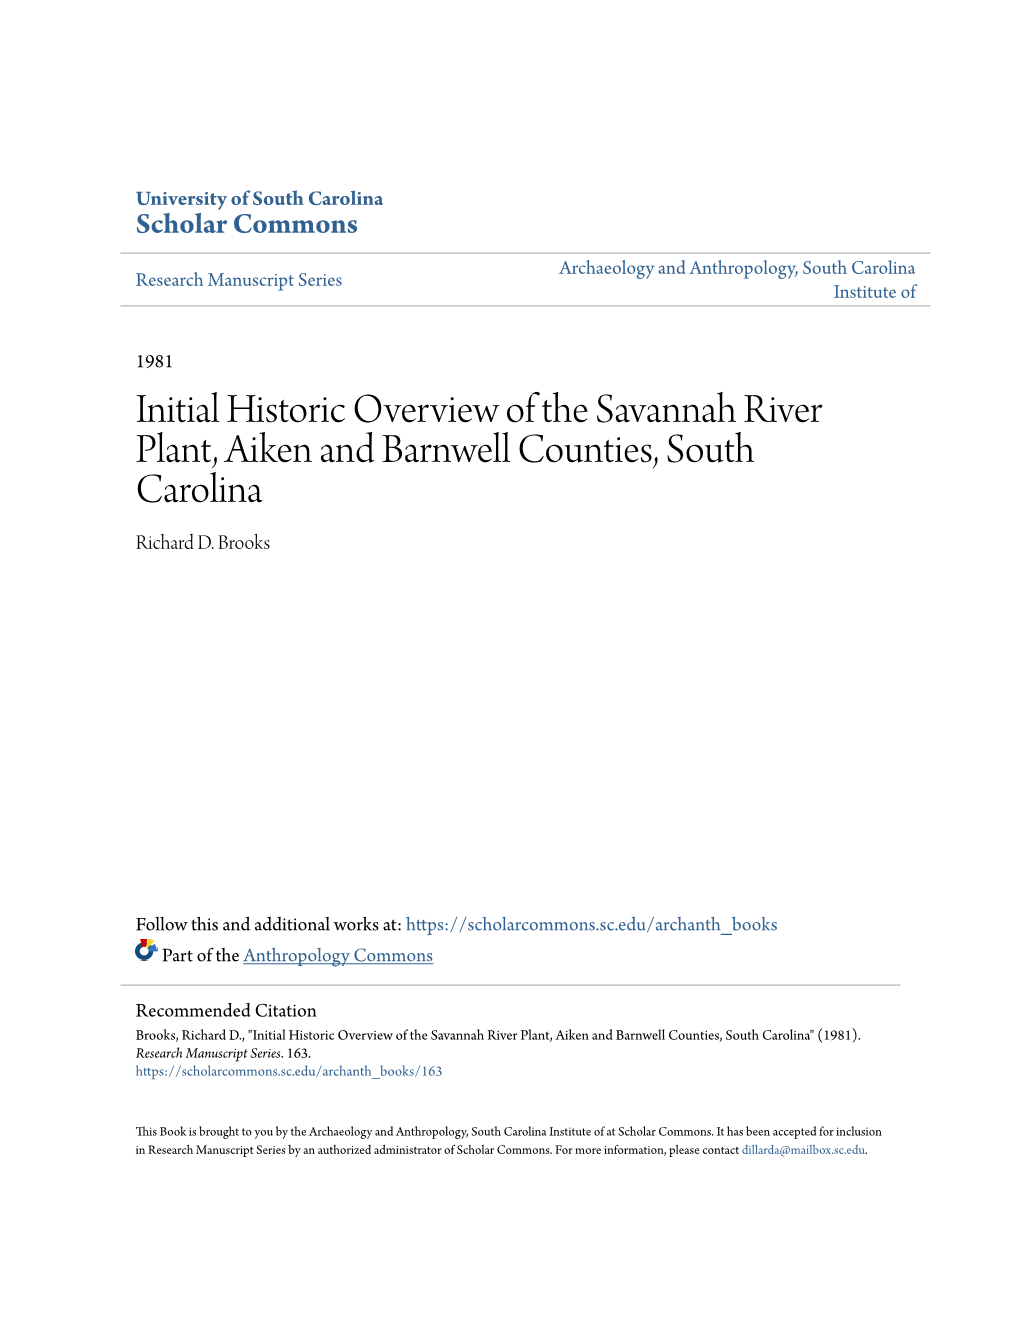 Initial Historic Overview of the Savannah River Plant, Aiken and Barnwell Counties, South Carolina Richard D